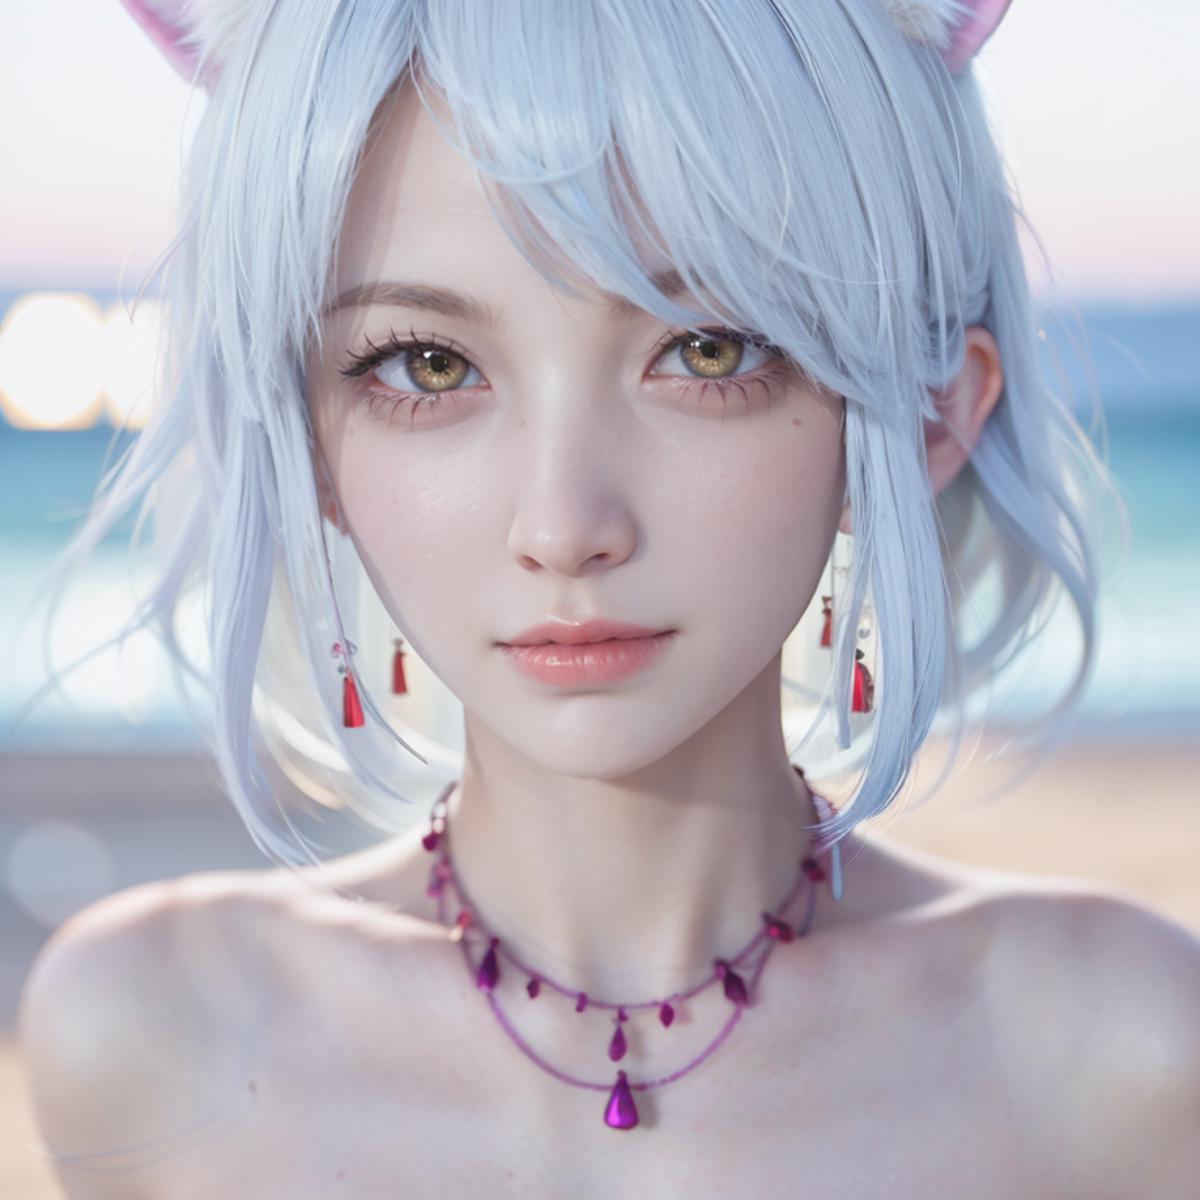 mlz_a girl from 3D model - v1.0 | Stable Diffusion LoRA | Civitai